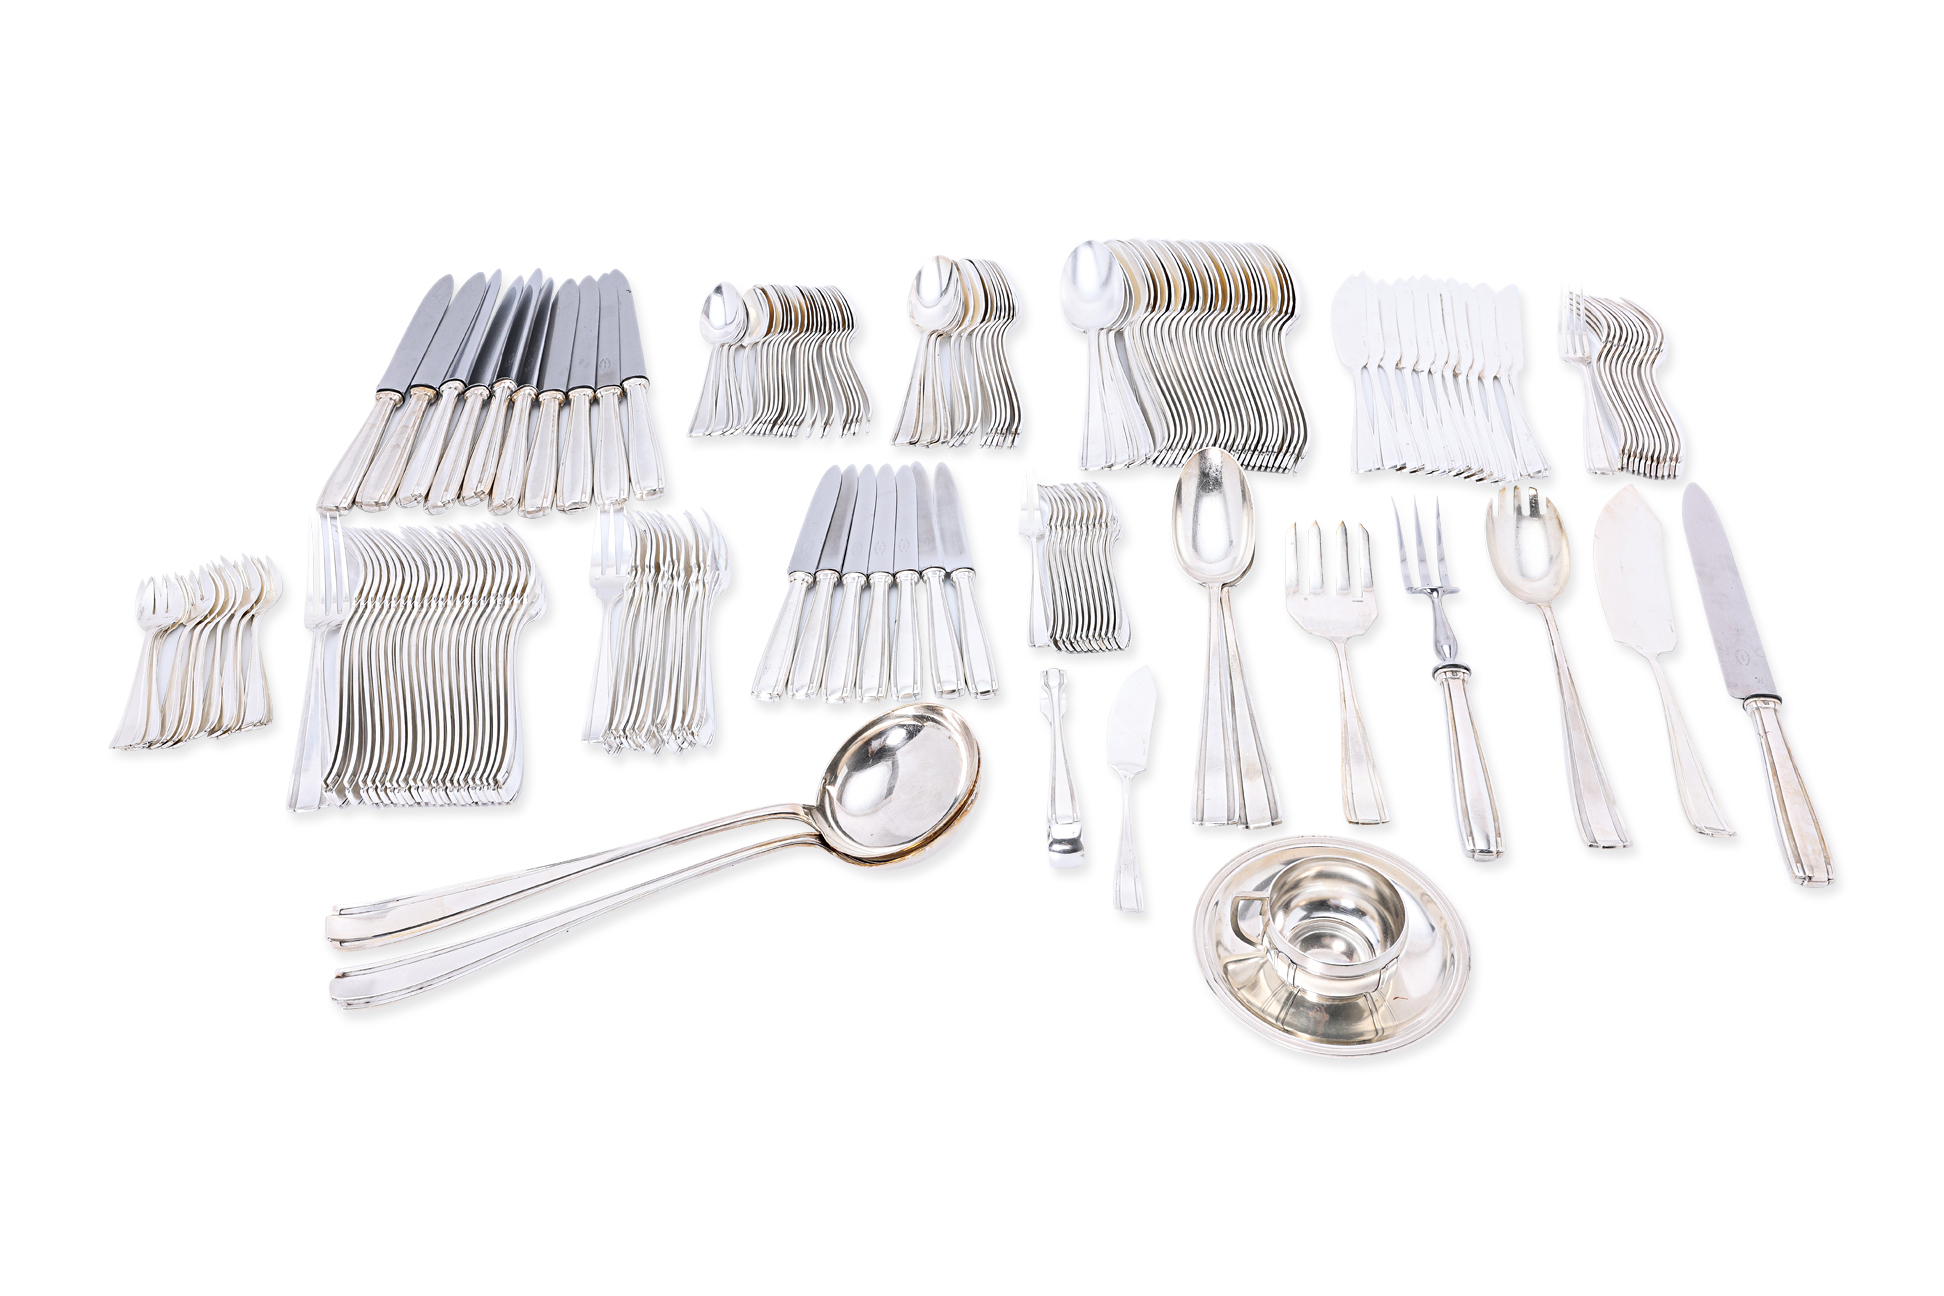 A SERVICE OF FRENCH ART DECO SILVER-PLATED CUTLERY